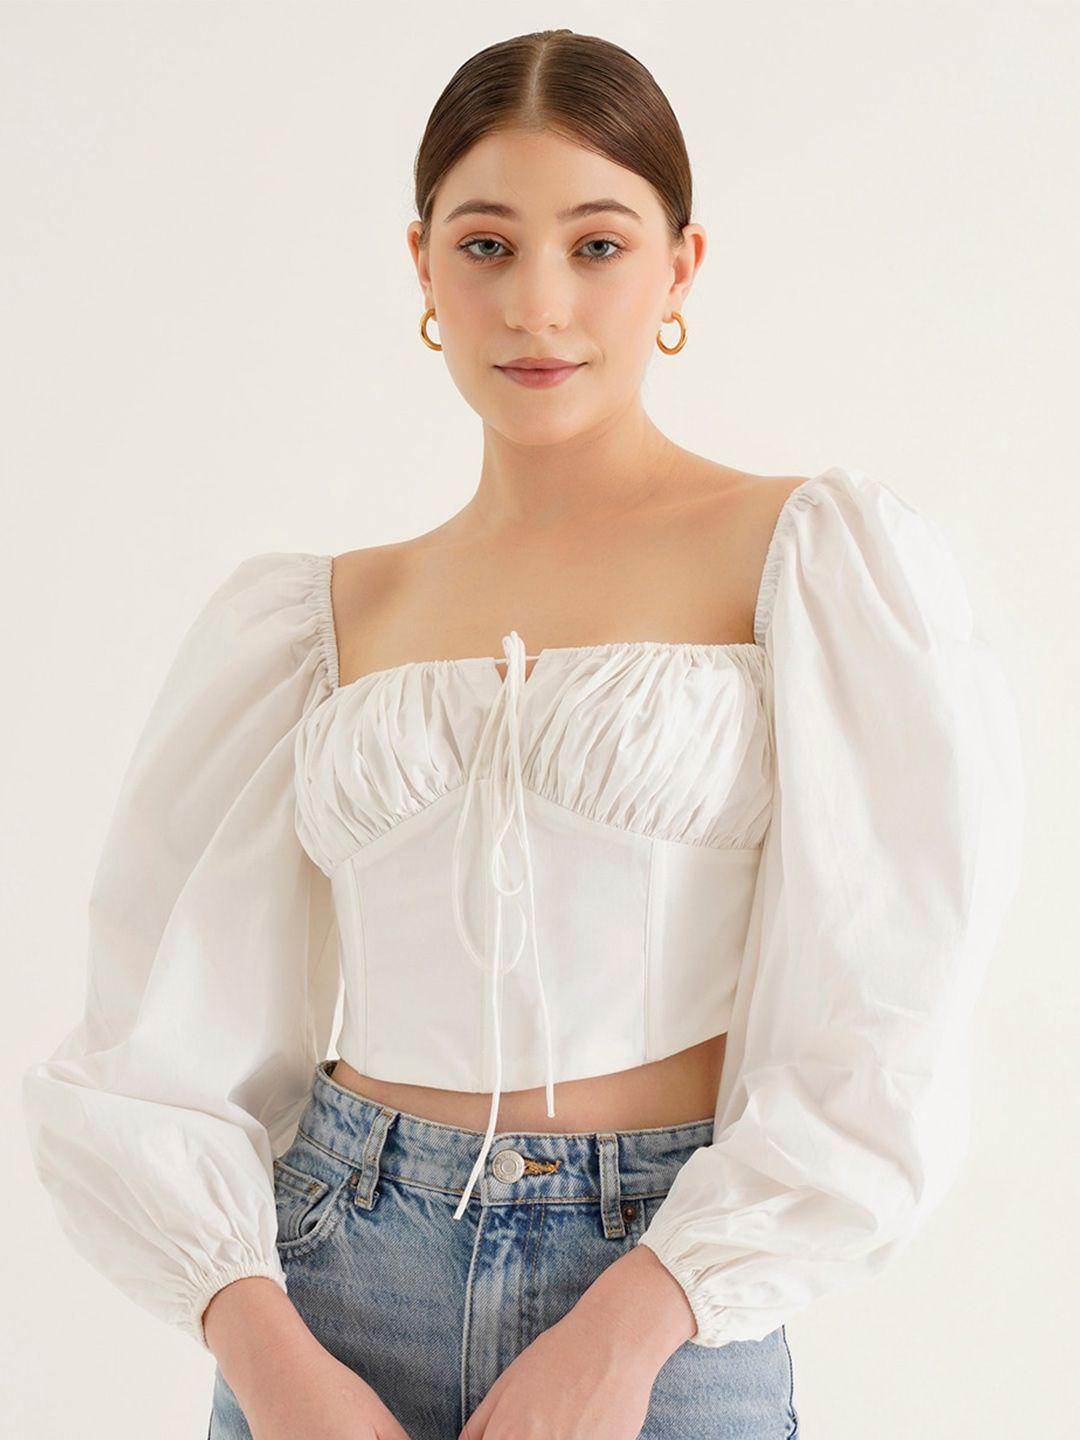 ipso facto puff sleeves cotton crop fitted top